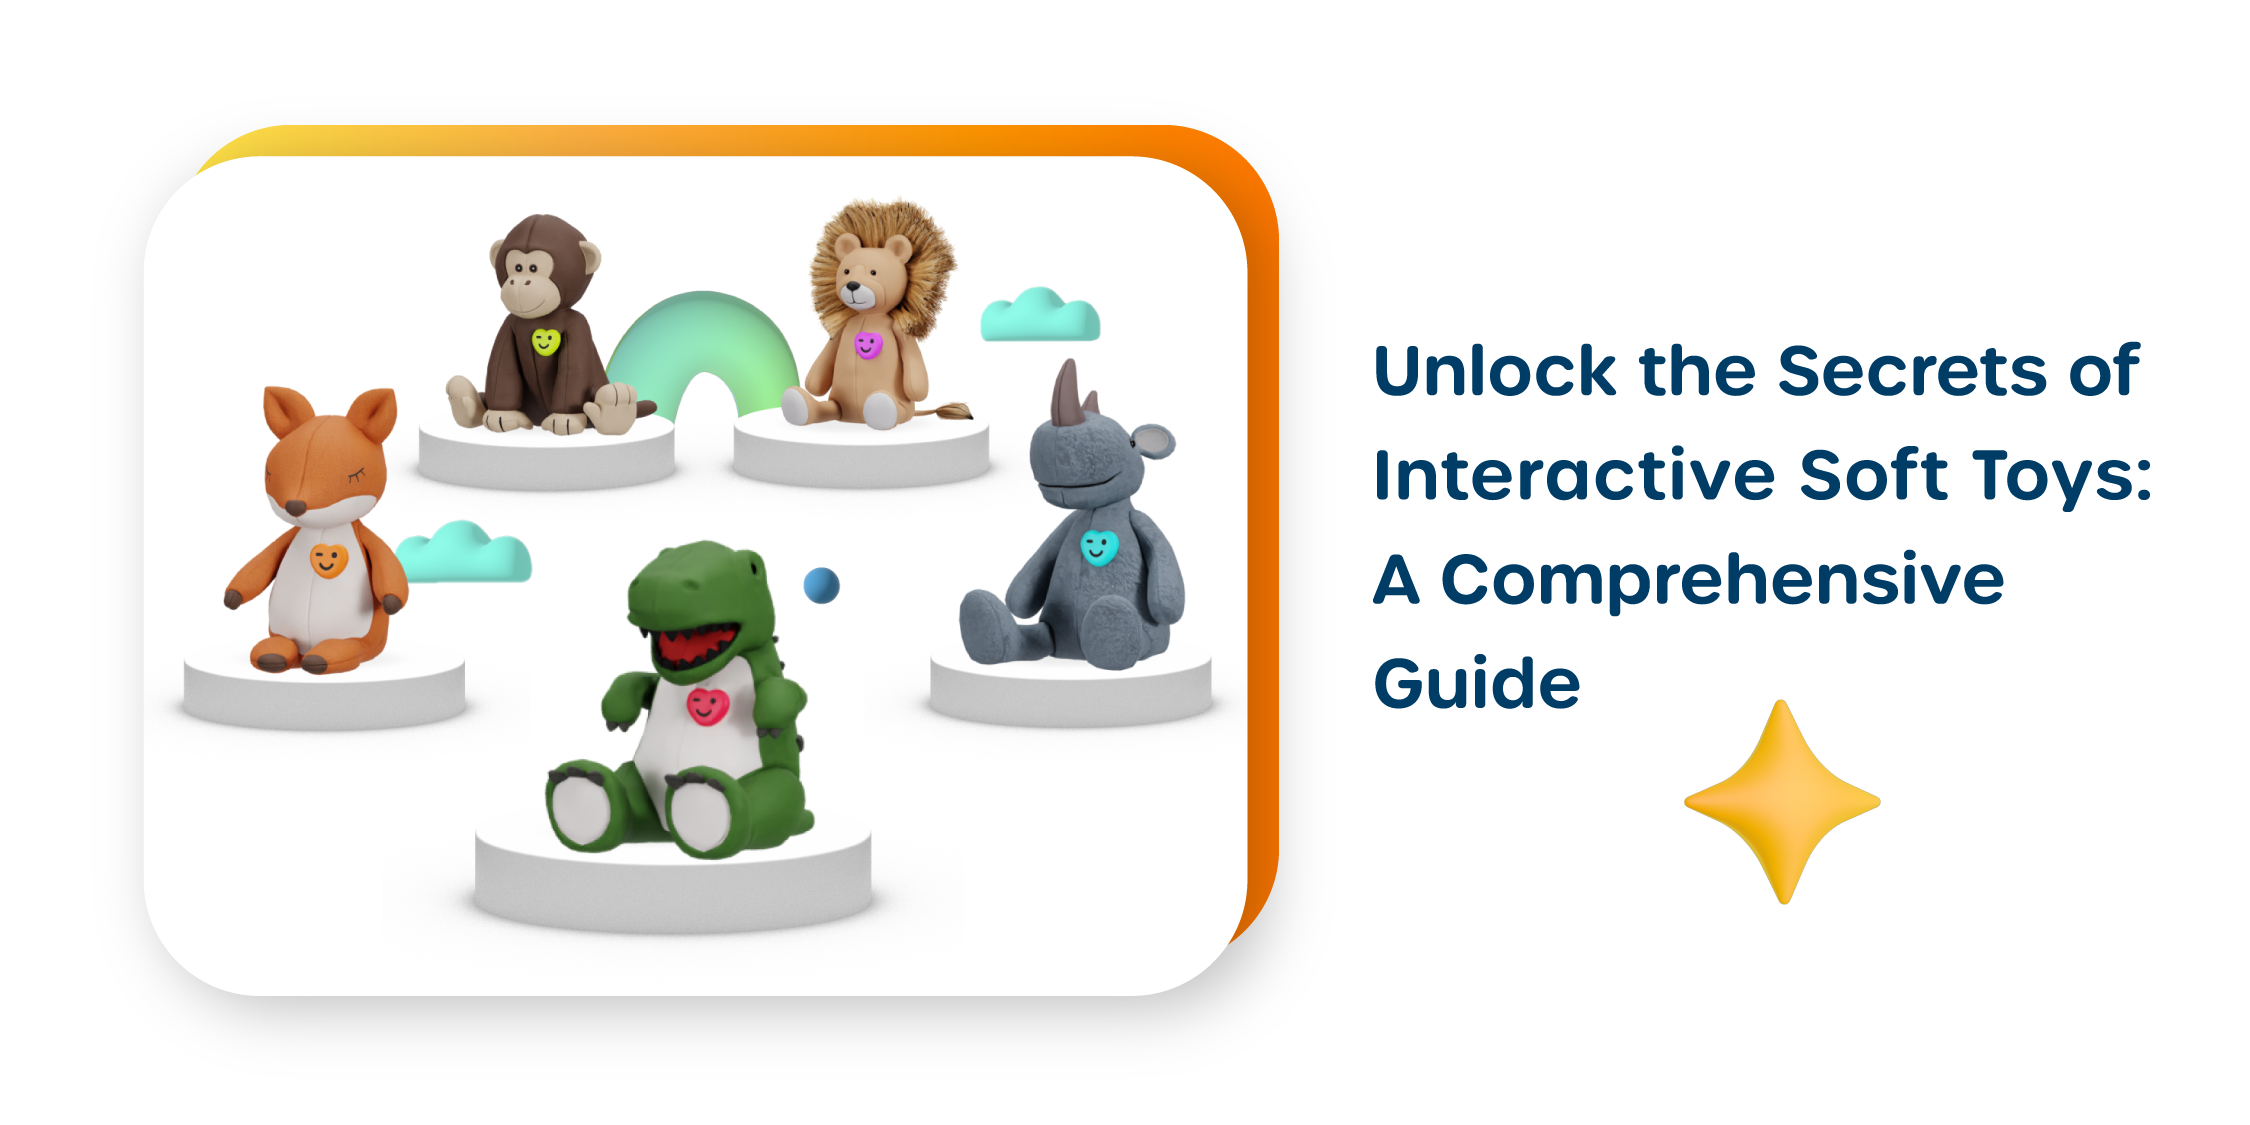 Unlock the Secrets of Interactive Soft Toys: A Comprehensive Guide